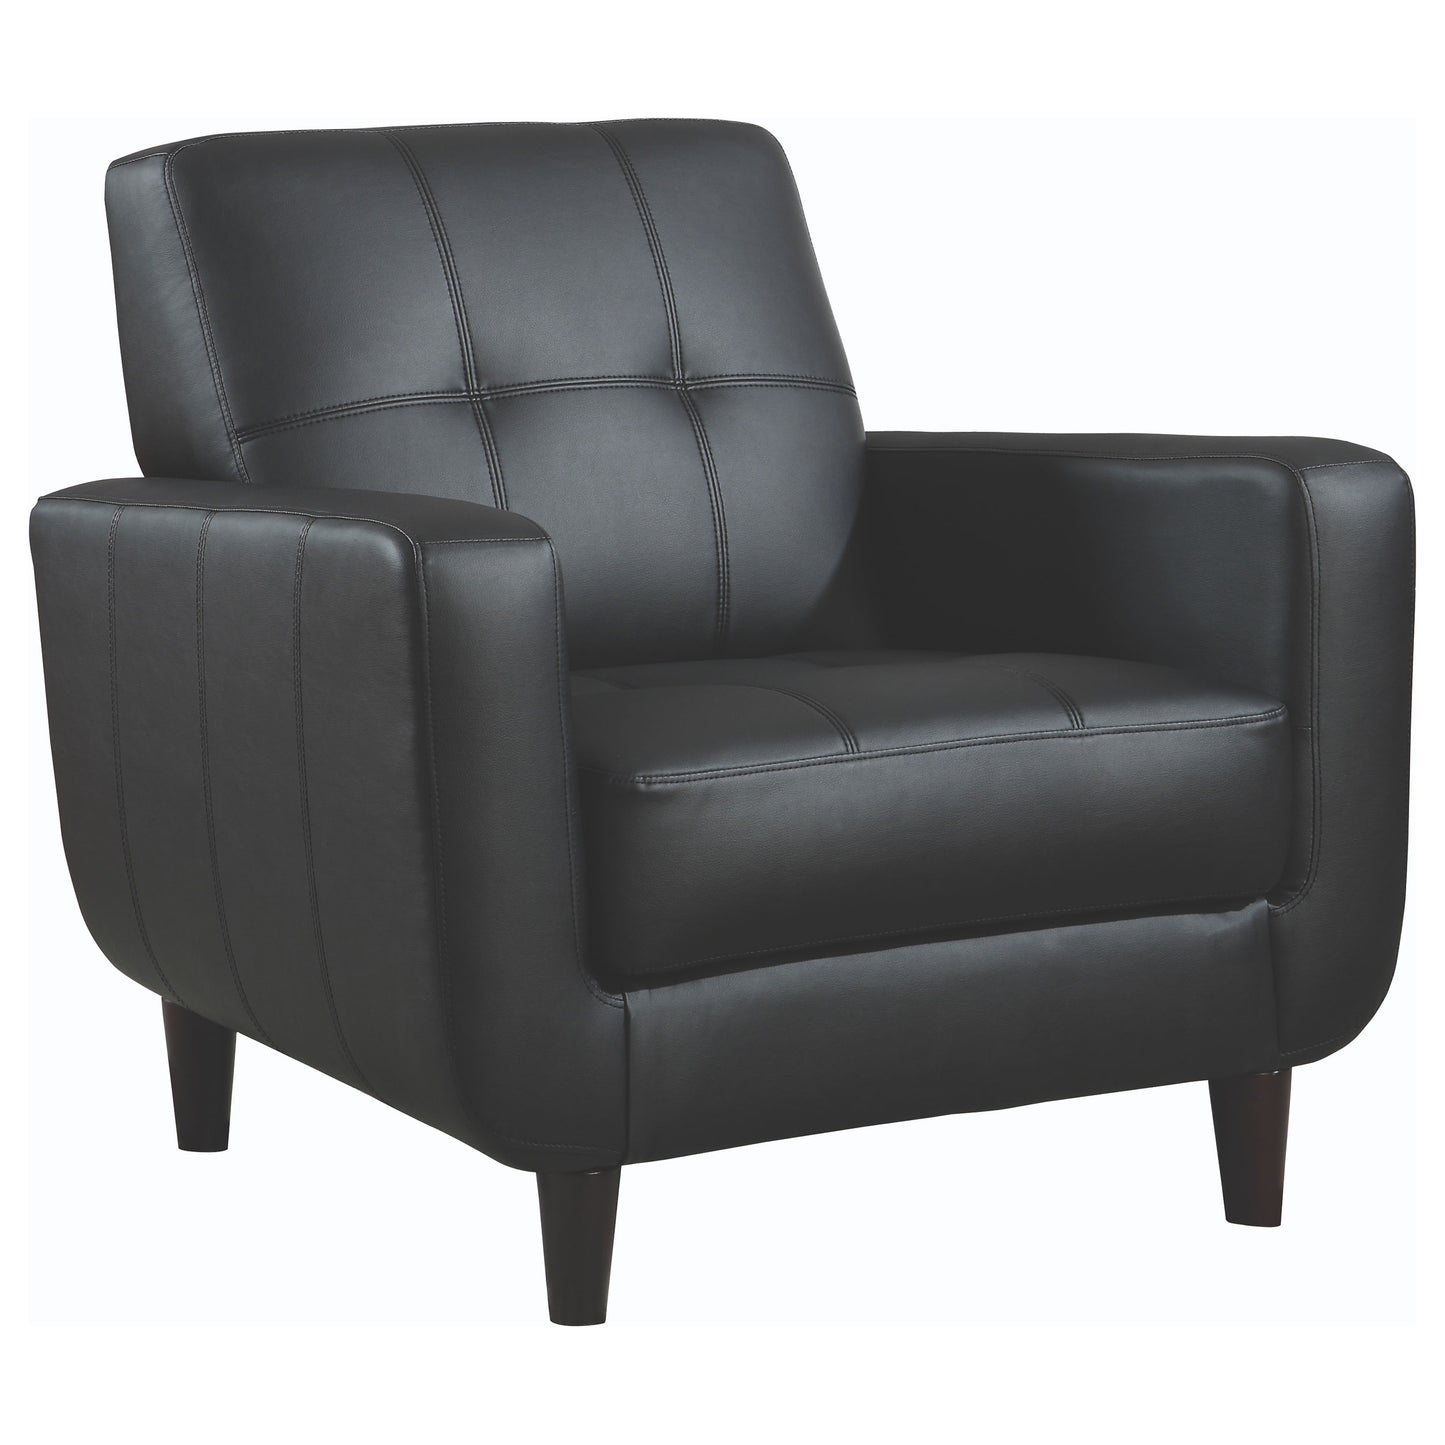 Aaron Padded Seat Accent Chair Black